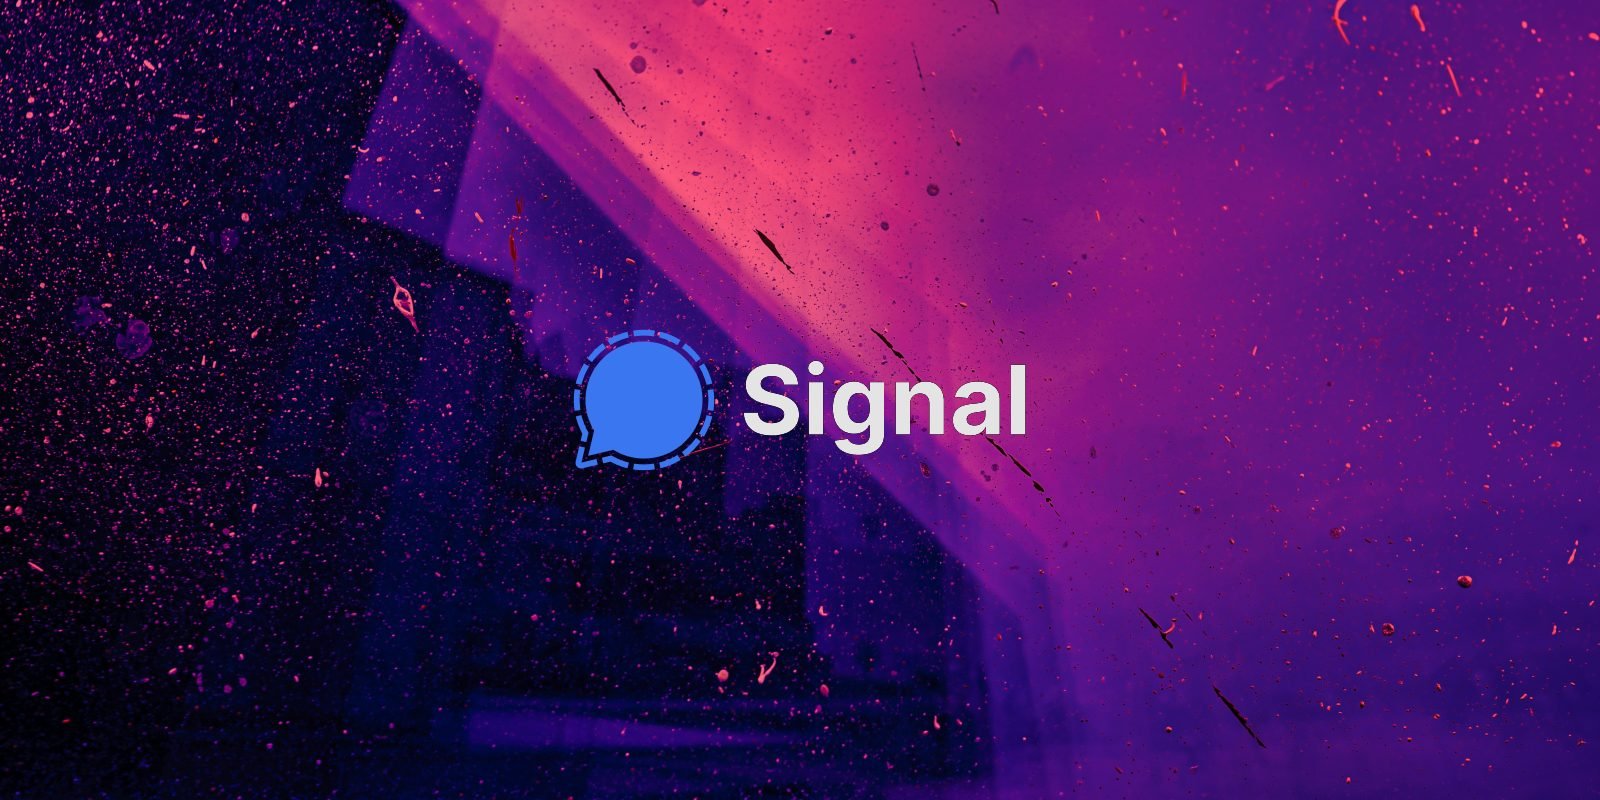 Signal ignores proxy censorship vulnerability, bans researchers